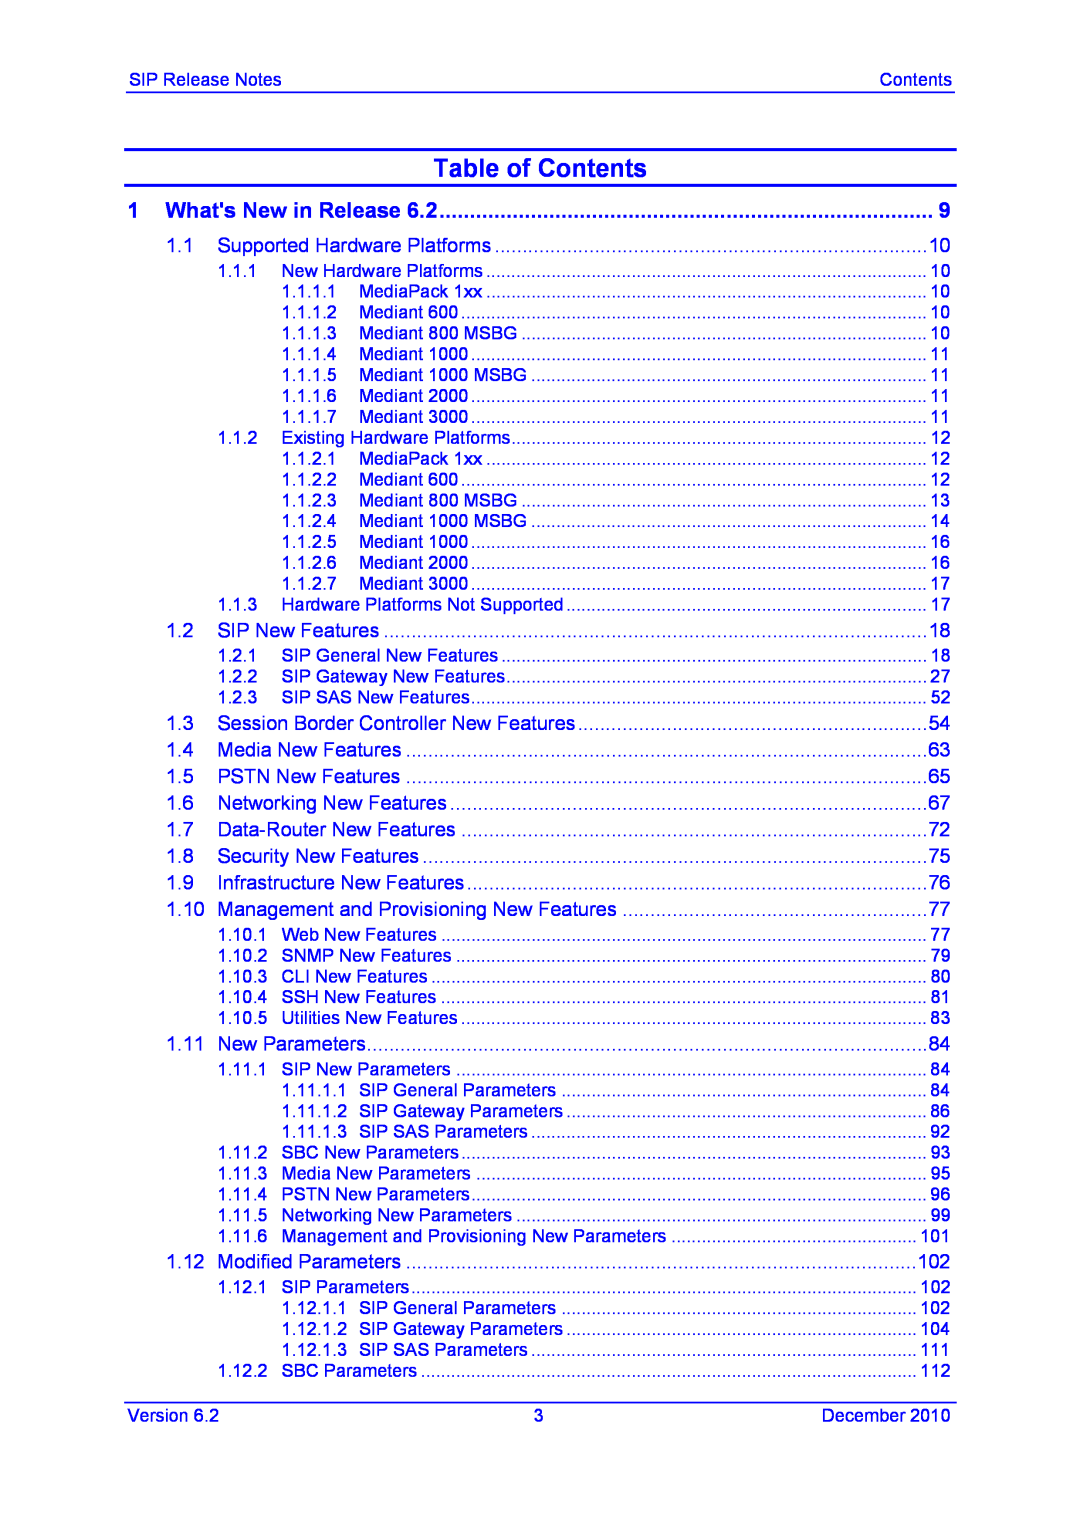 AudioControl VERSION 6.2 manual Table of Contents, Whats New in Release 